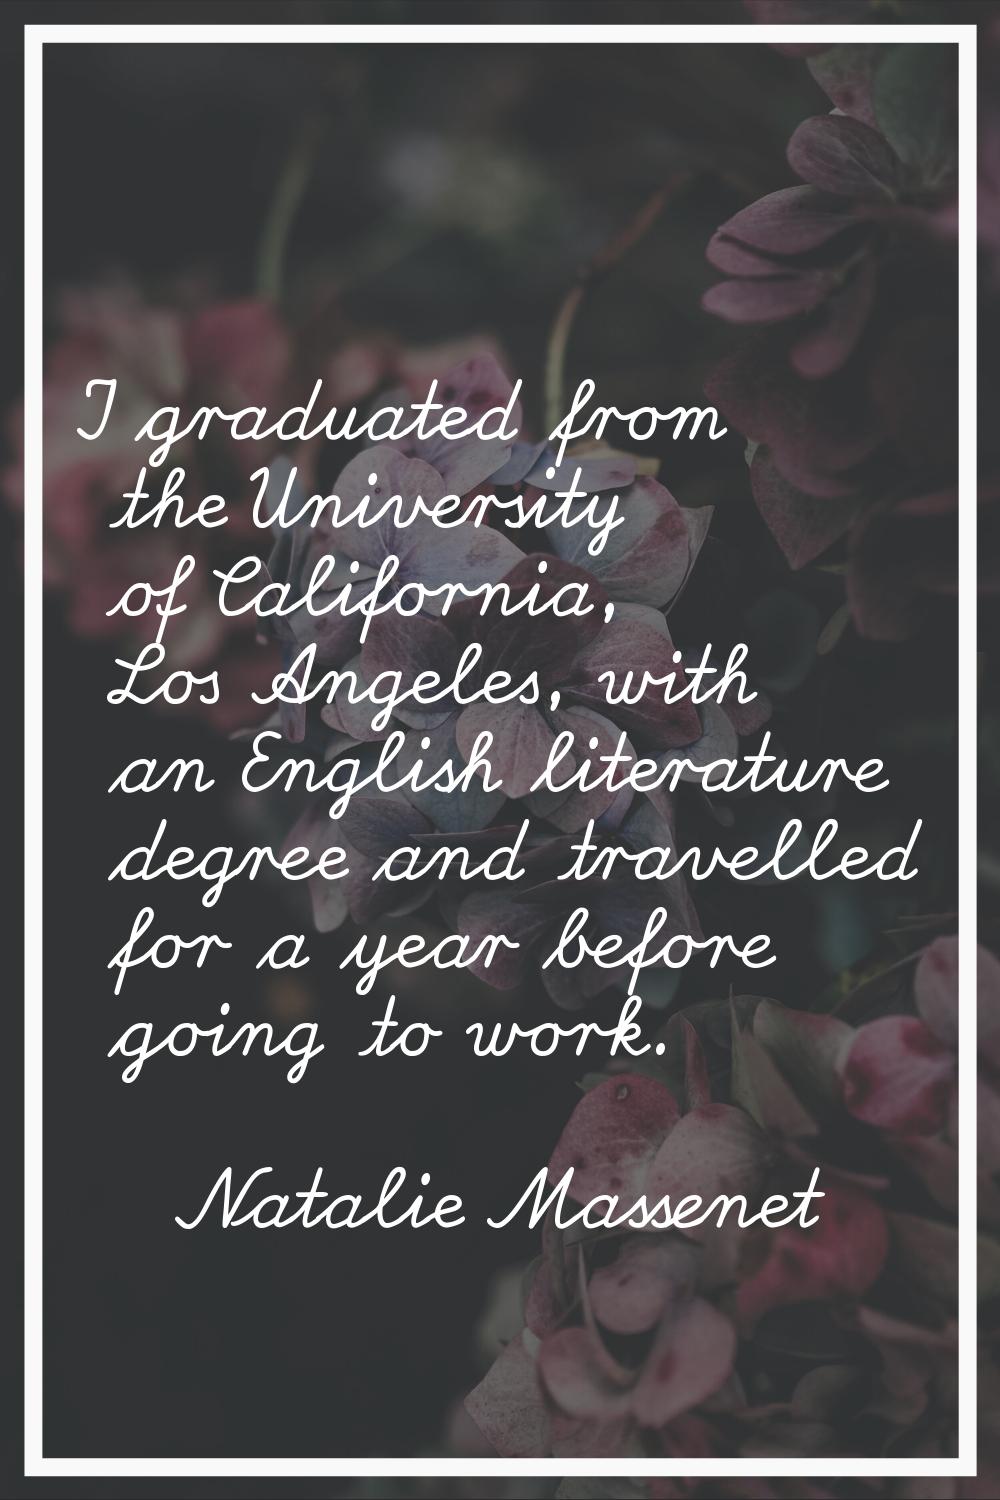 I graduated from the University of California, Los Angeles, with an English literature degree and t